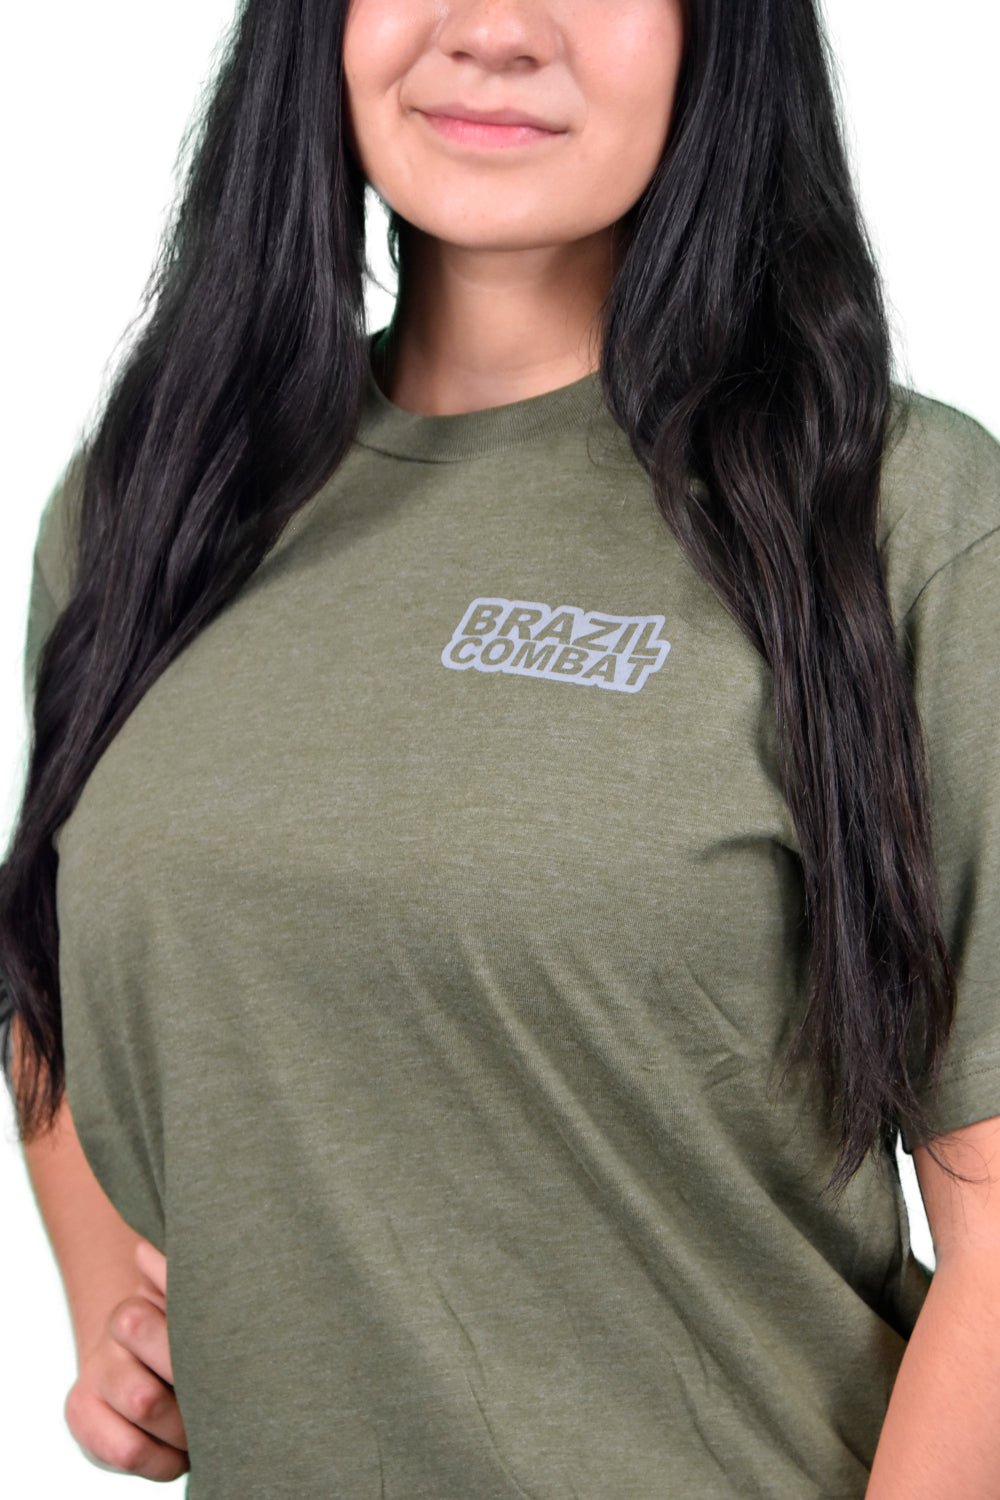 Brazil Combat Female T-Shirt - Stylish, Breathable, and Durable - Ideal for Workouts - Everyday Wear – Fashion forward Looks - Perfect for Layering